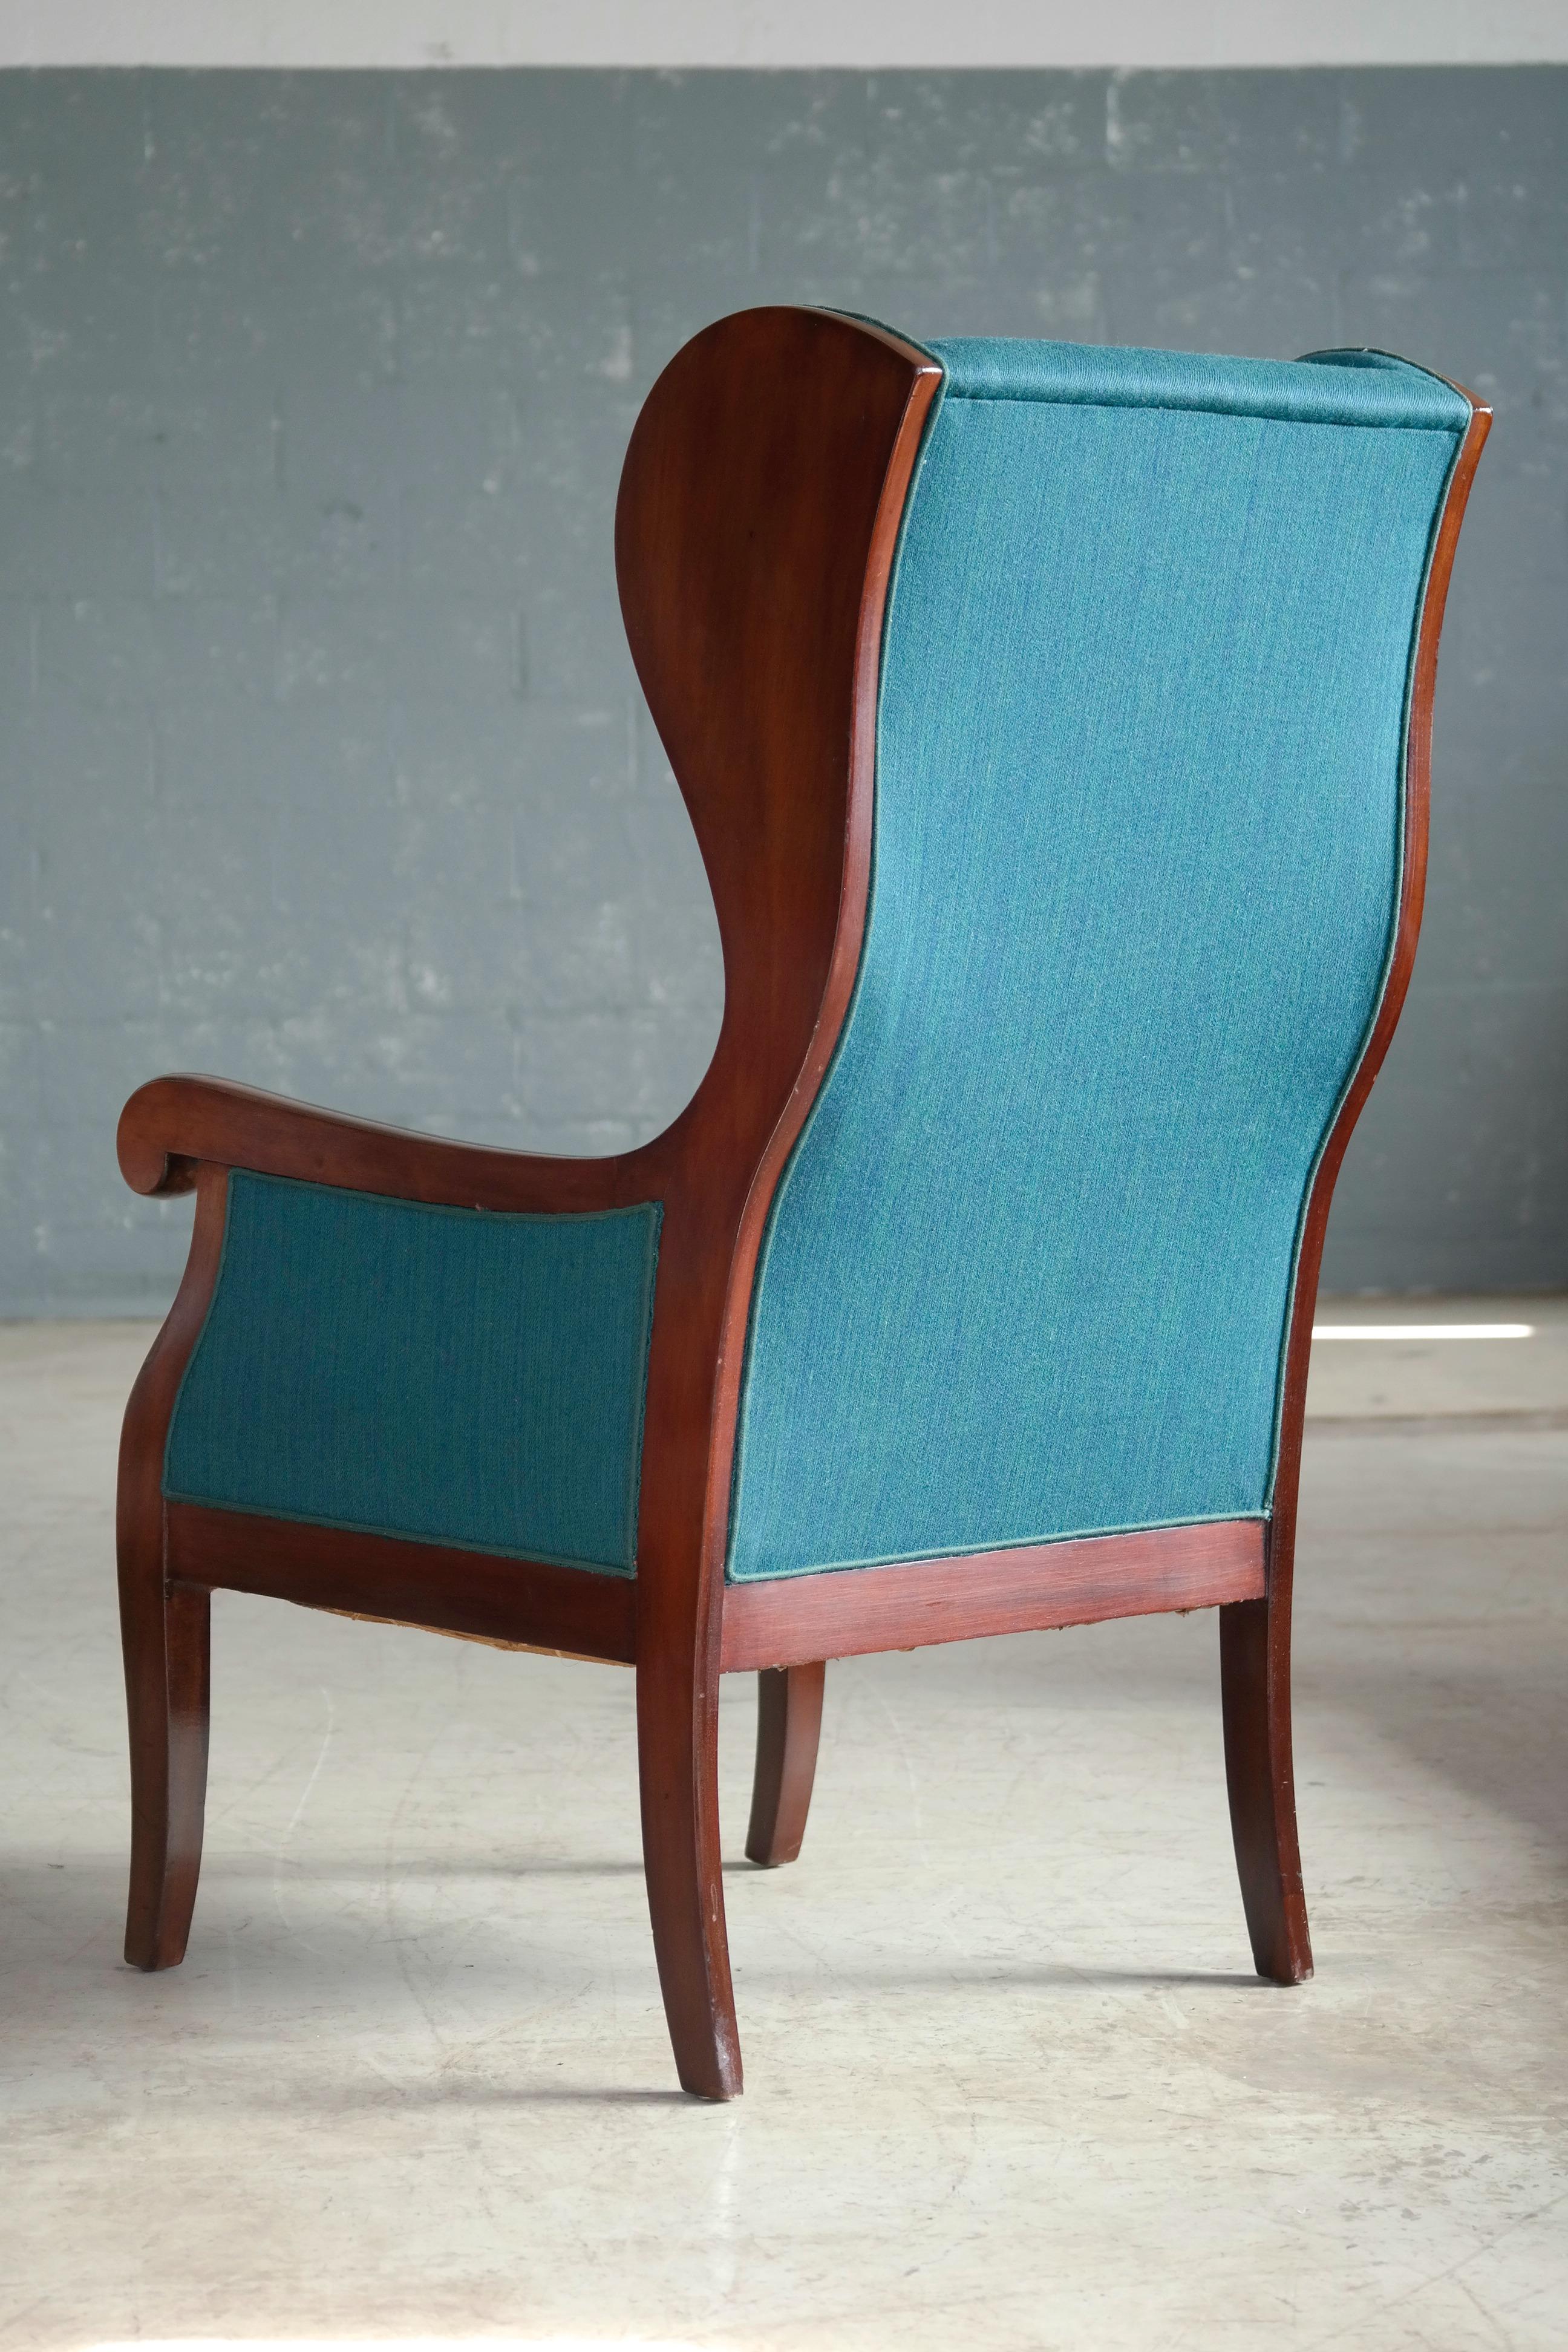 Mid-20th Century Danish 1940s Wingback Chair in Mahogany by Master Carpenter Frits Henningsen